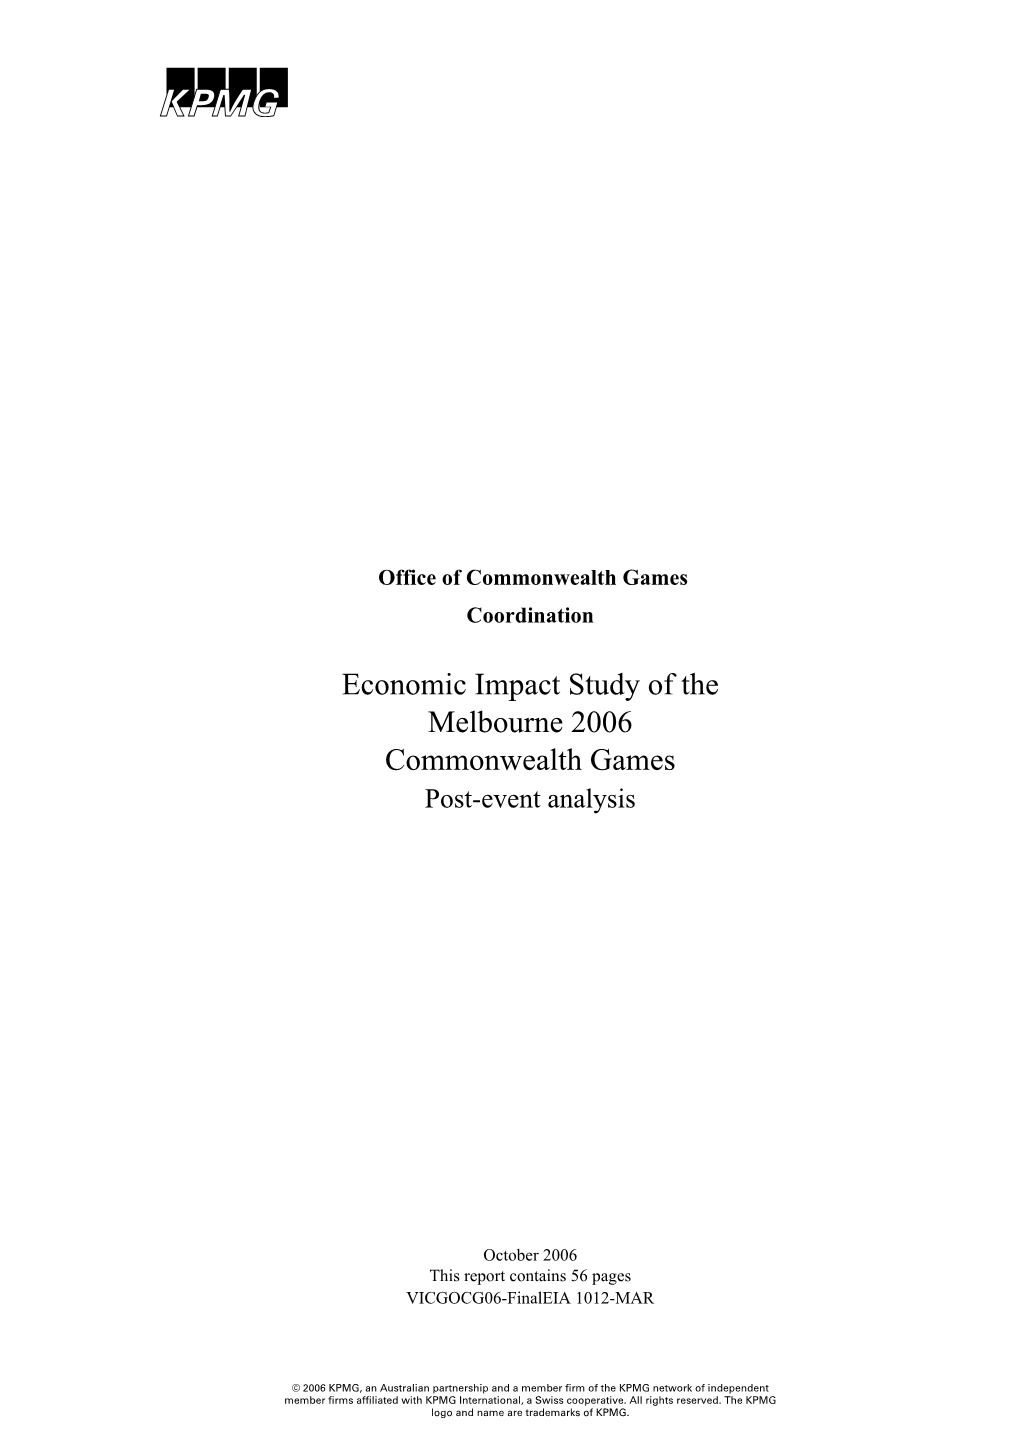 Economic Impact Study of the Melbourne 2006 Commonwealth Games Post-Event Analysis